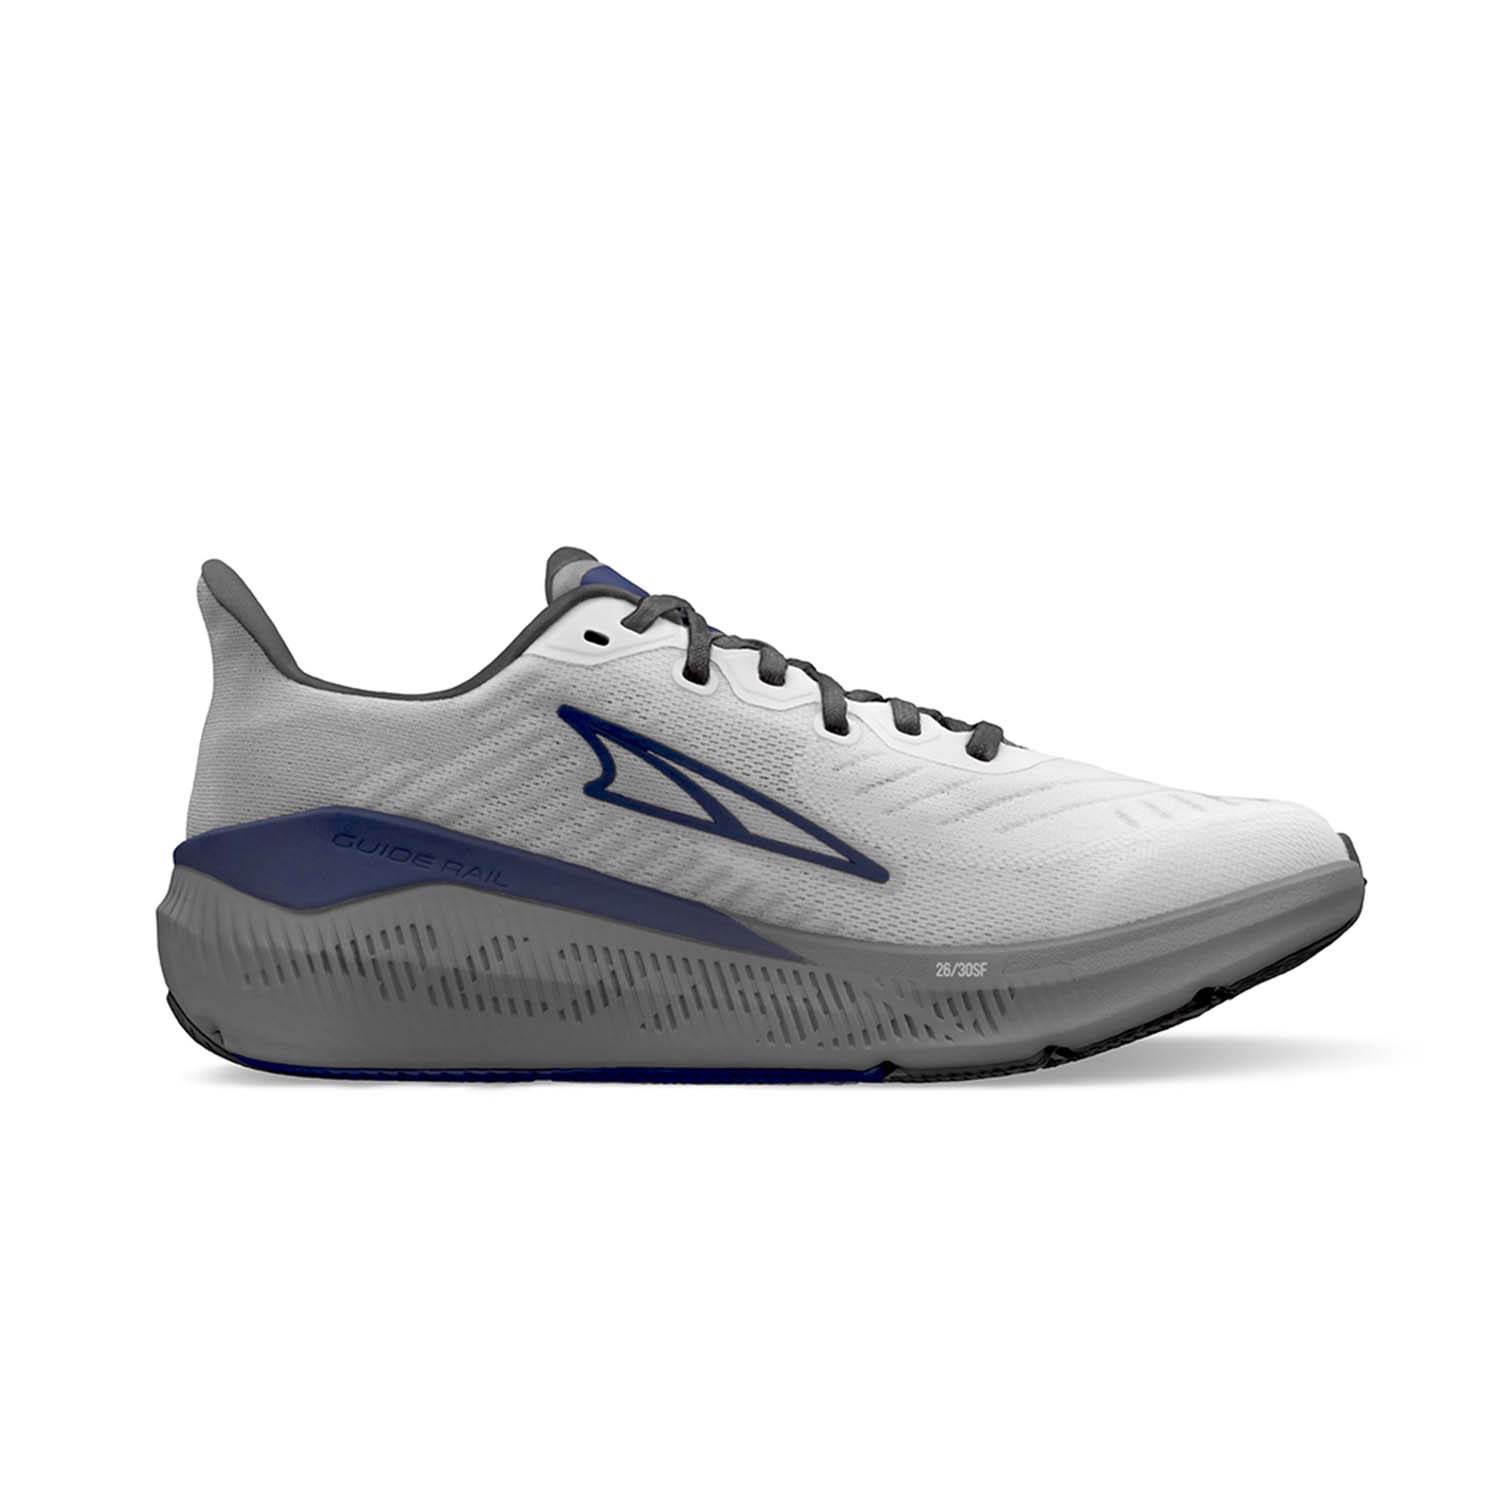 Altra Experience Form - White/Gray